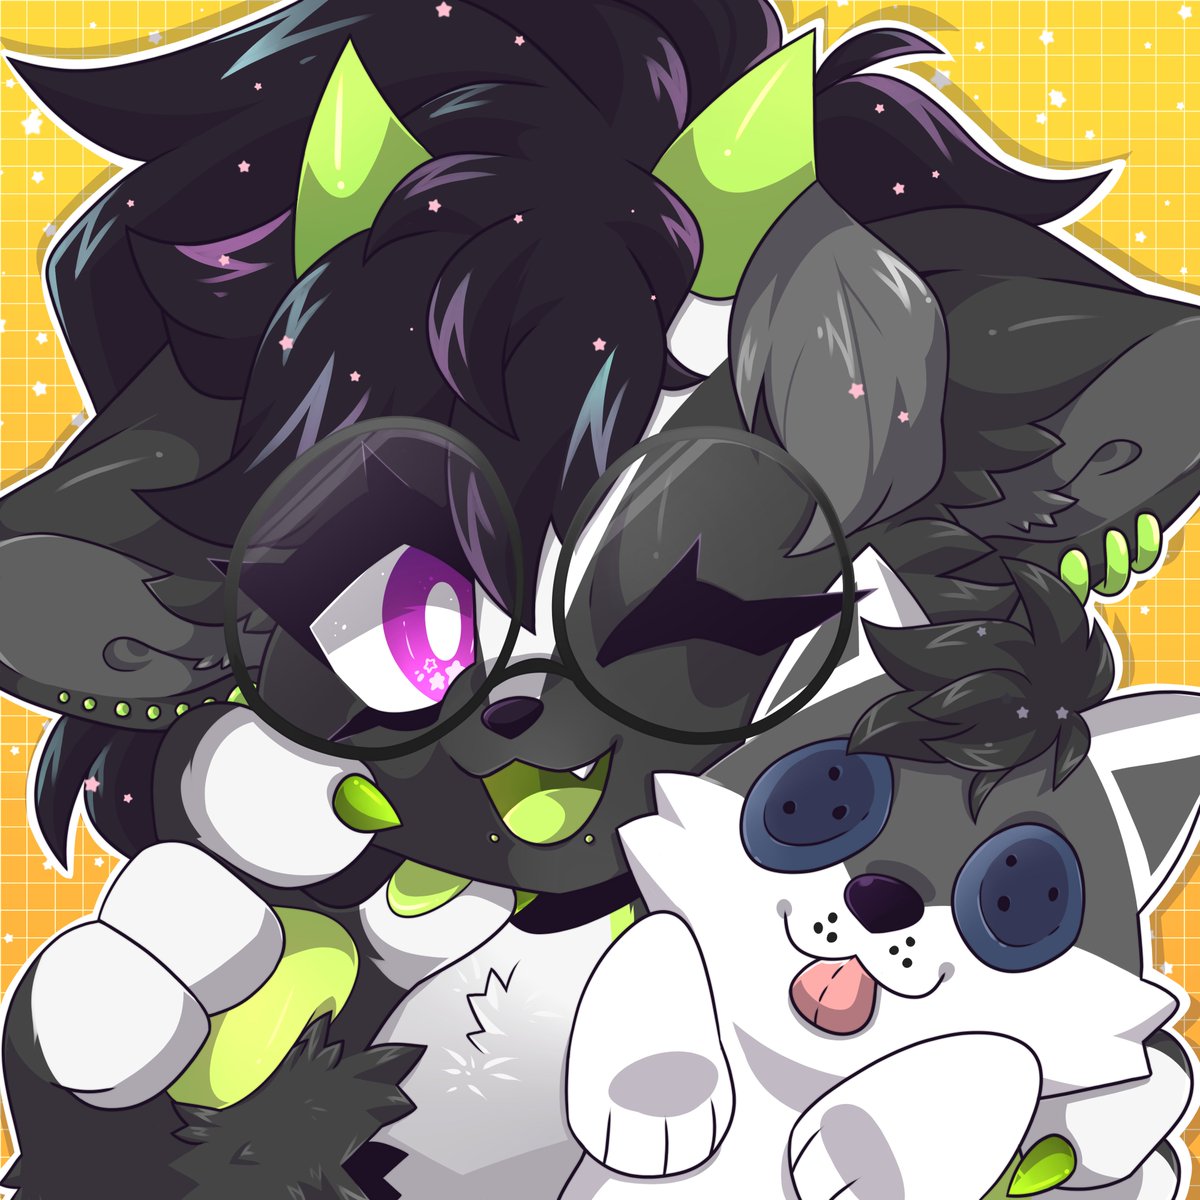 Lovely new icon made by @TOXIKAIJU of me and my bebe Lumi 💙💙💚💚